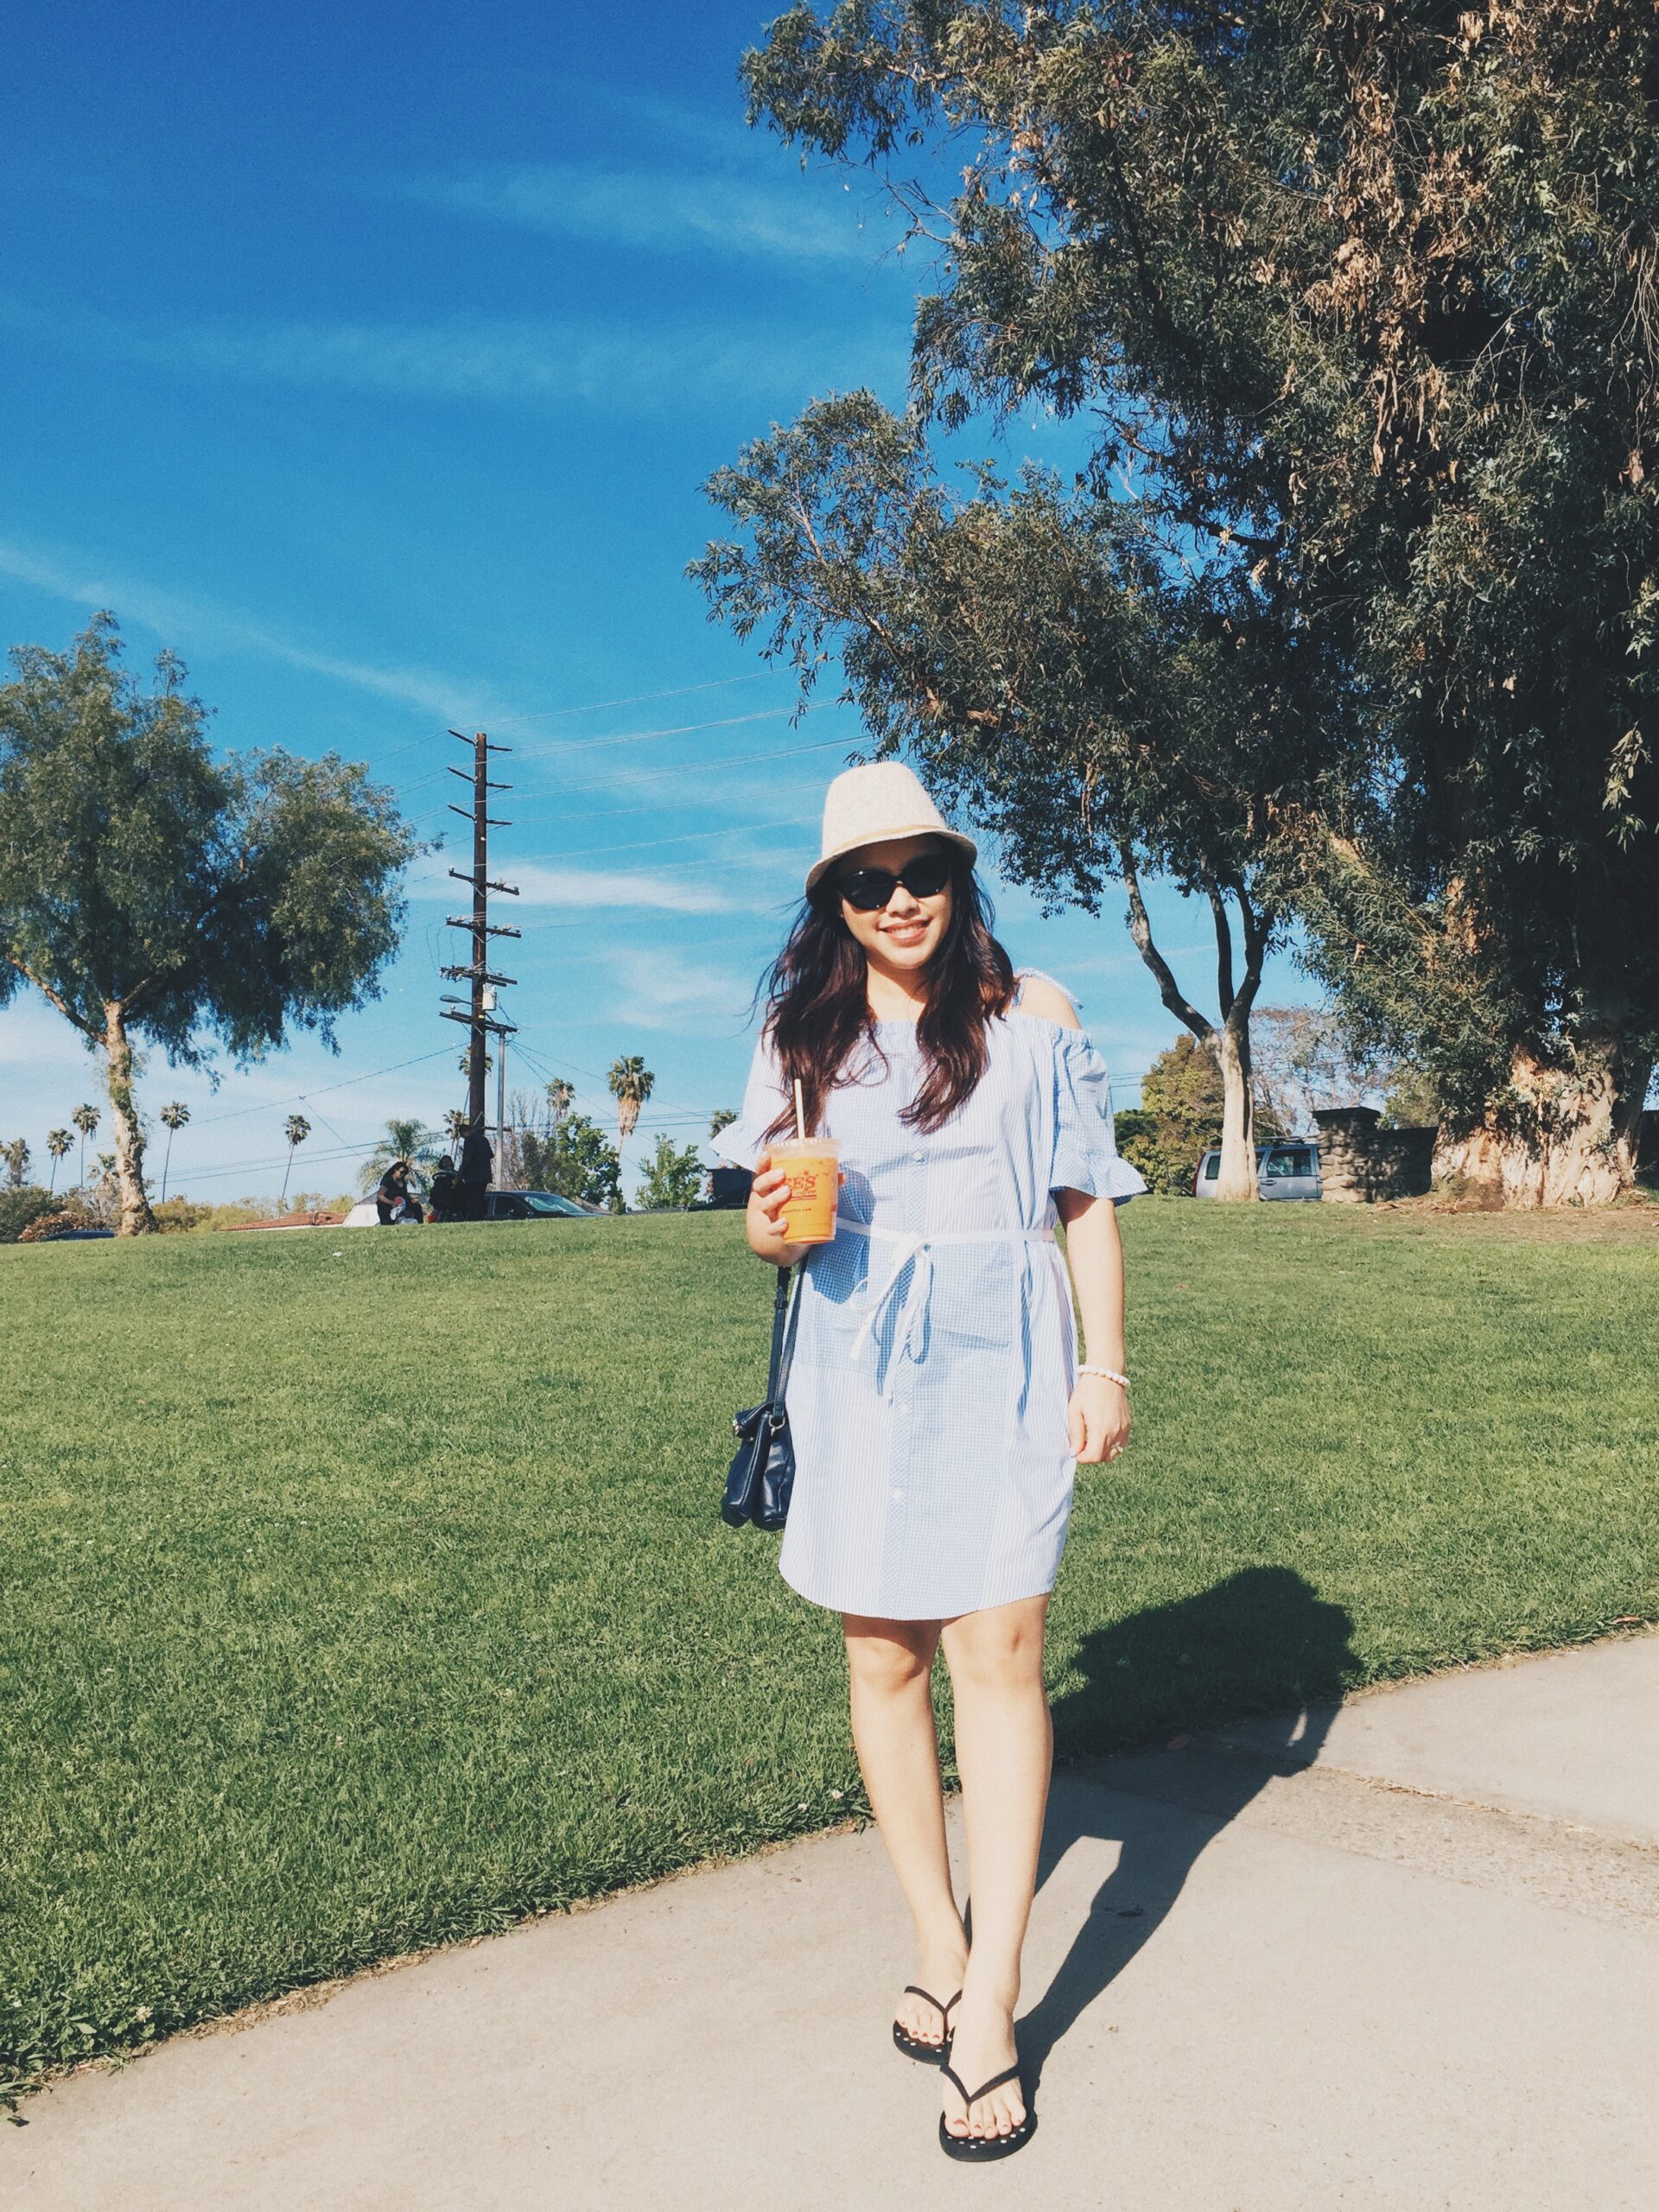 Instagram: @pslilyboutique, Pinterest, Spring Day, Los Angeles fashion blogger, top fashion blog, best fashion blog, fashion & personal style blog, travel blog, travel blogger, LA fashion blogger, fashion blogger of PSLily Boutique, Spring Day, Spring 2018 outfit ideas, Blue & White Gingham Buffalo David Bitton Dress, 5.10.18, Target black and white polka dots flip flops, lee’s sandwiches thai iced coffee, Kenneth Cole navy blue crossbody bag